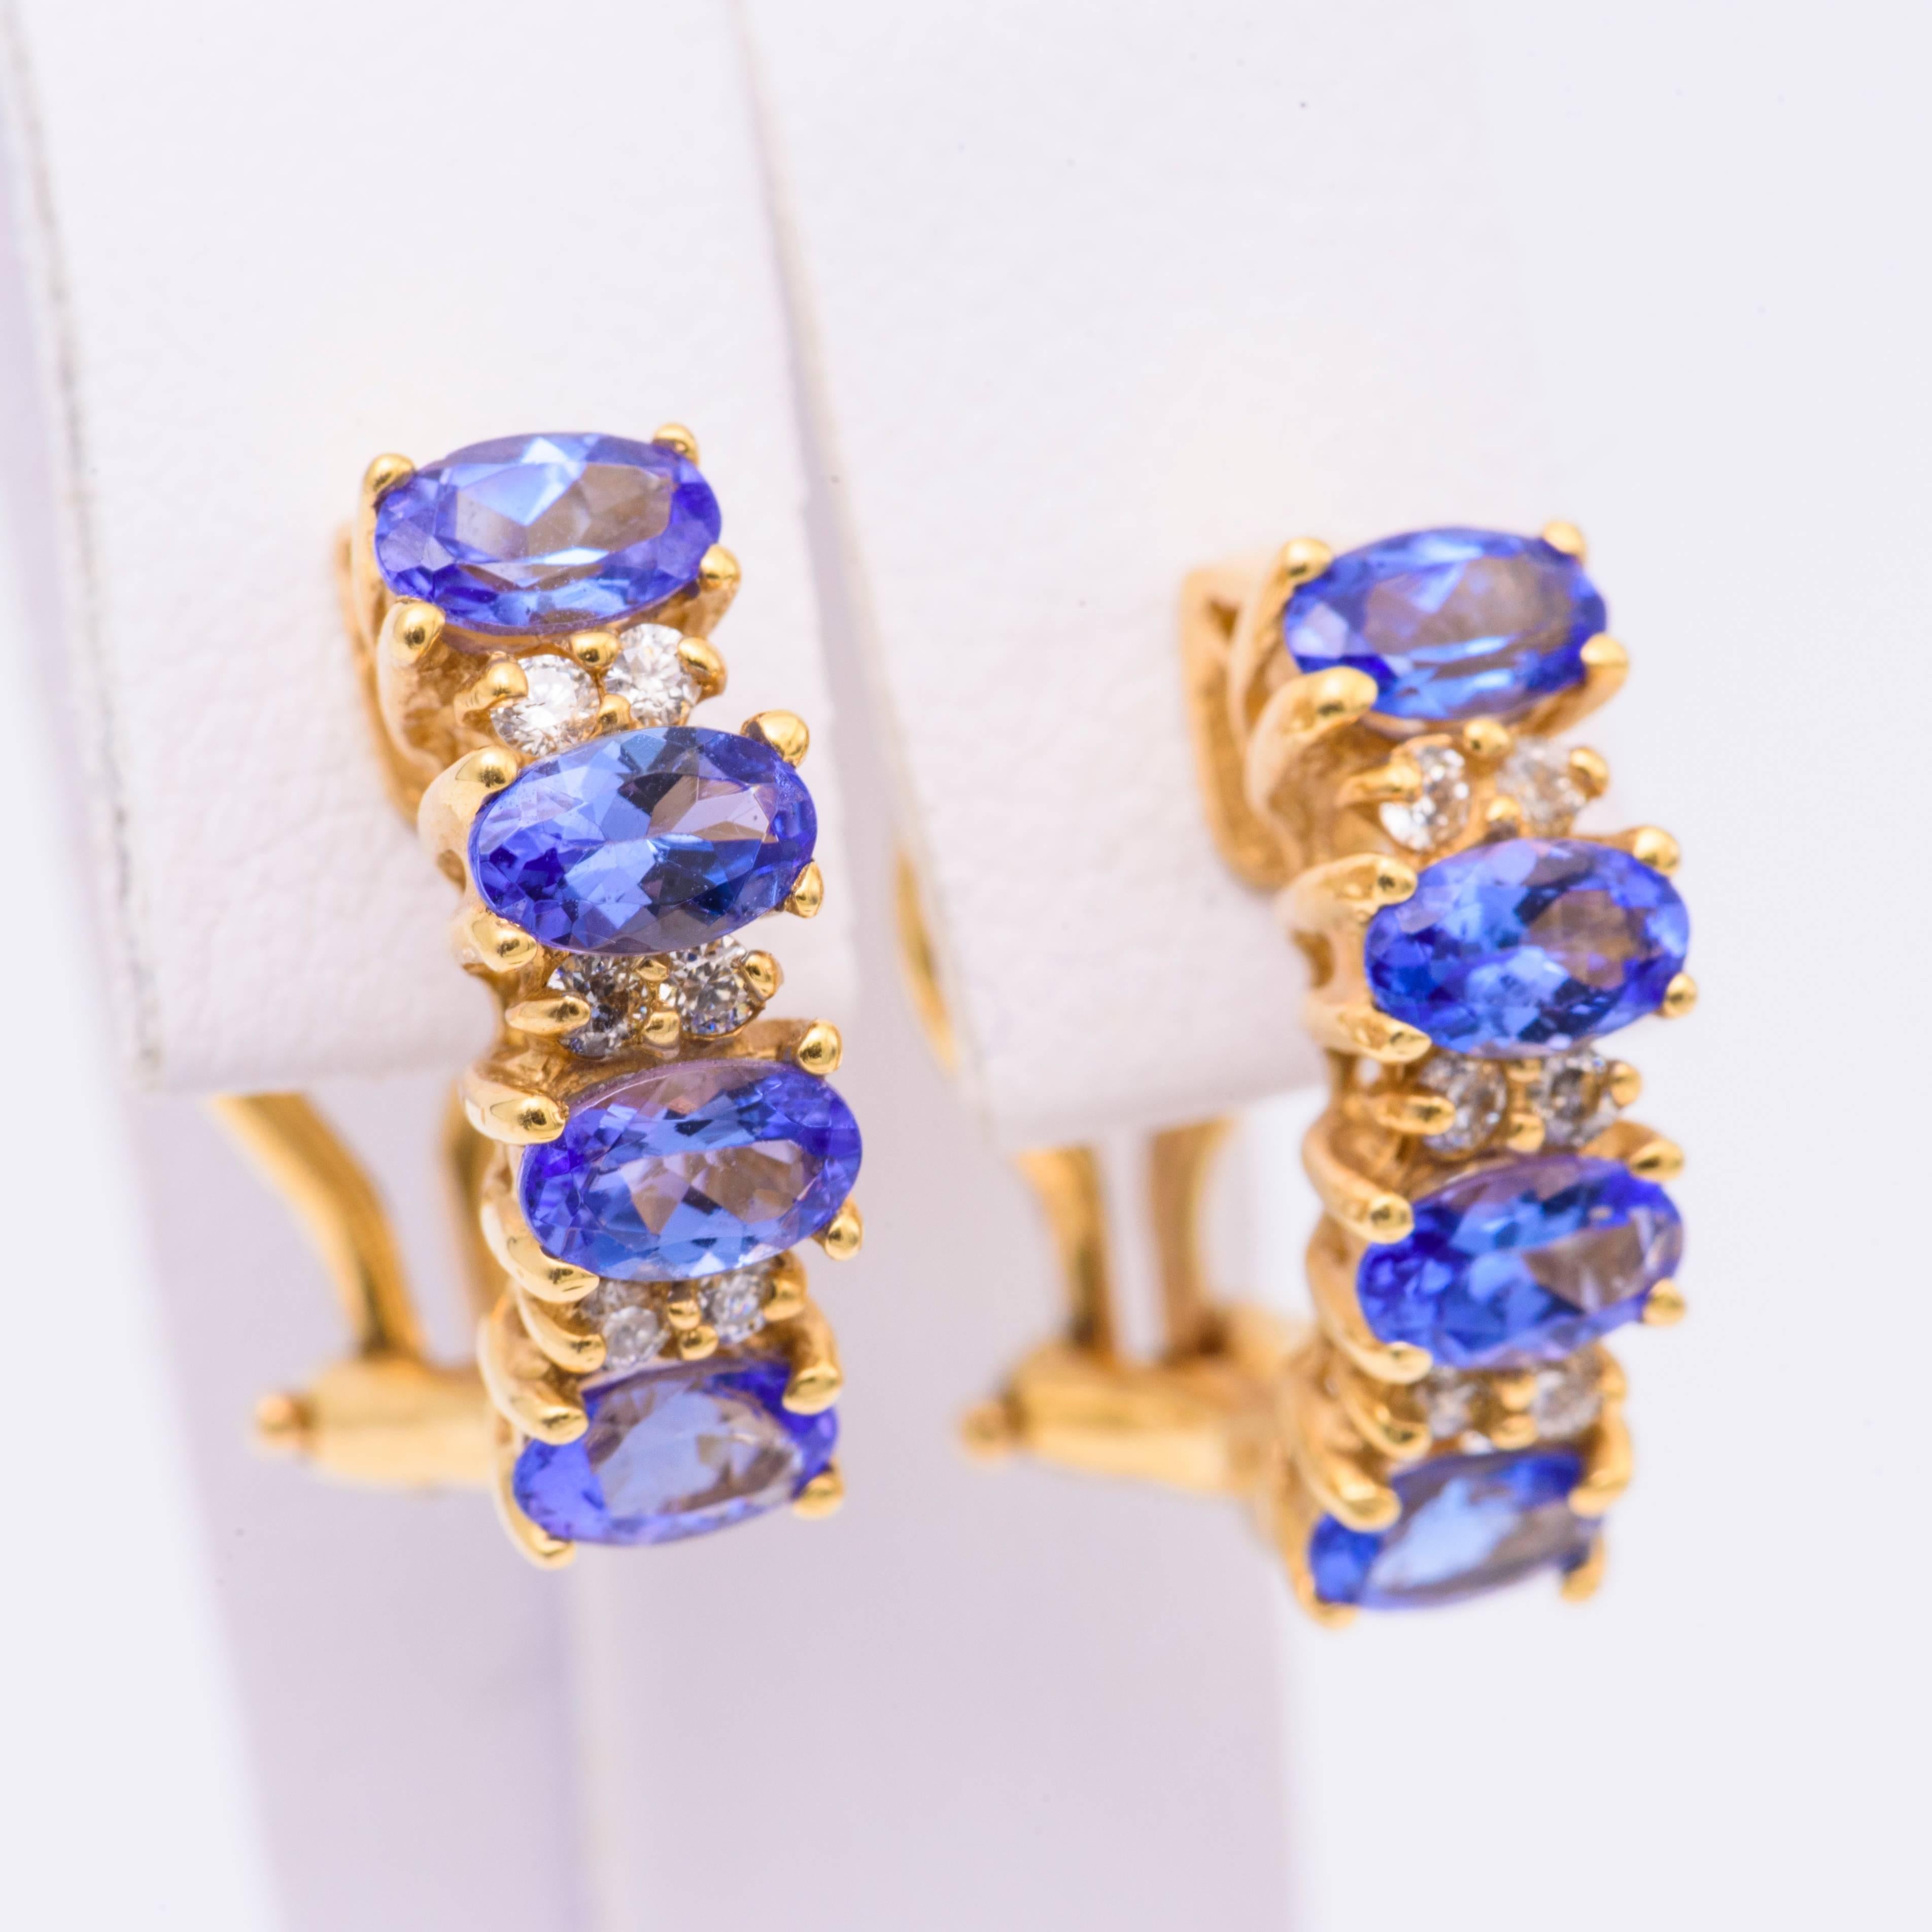 14K Yellow Gold earrings featuring oval cut Tanzanites measuring 5 x 3 mm and weighing 1.90 carats with diamond sections weighing 0.17 carats. Earrings measures 16 x 3 mm.